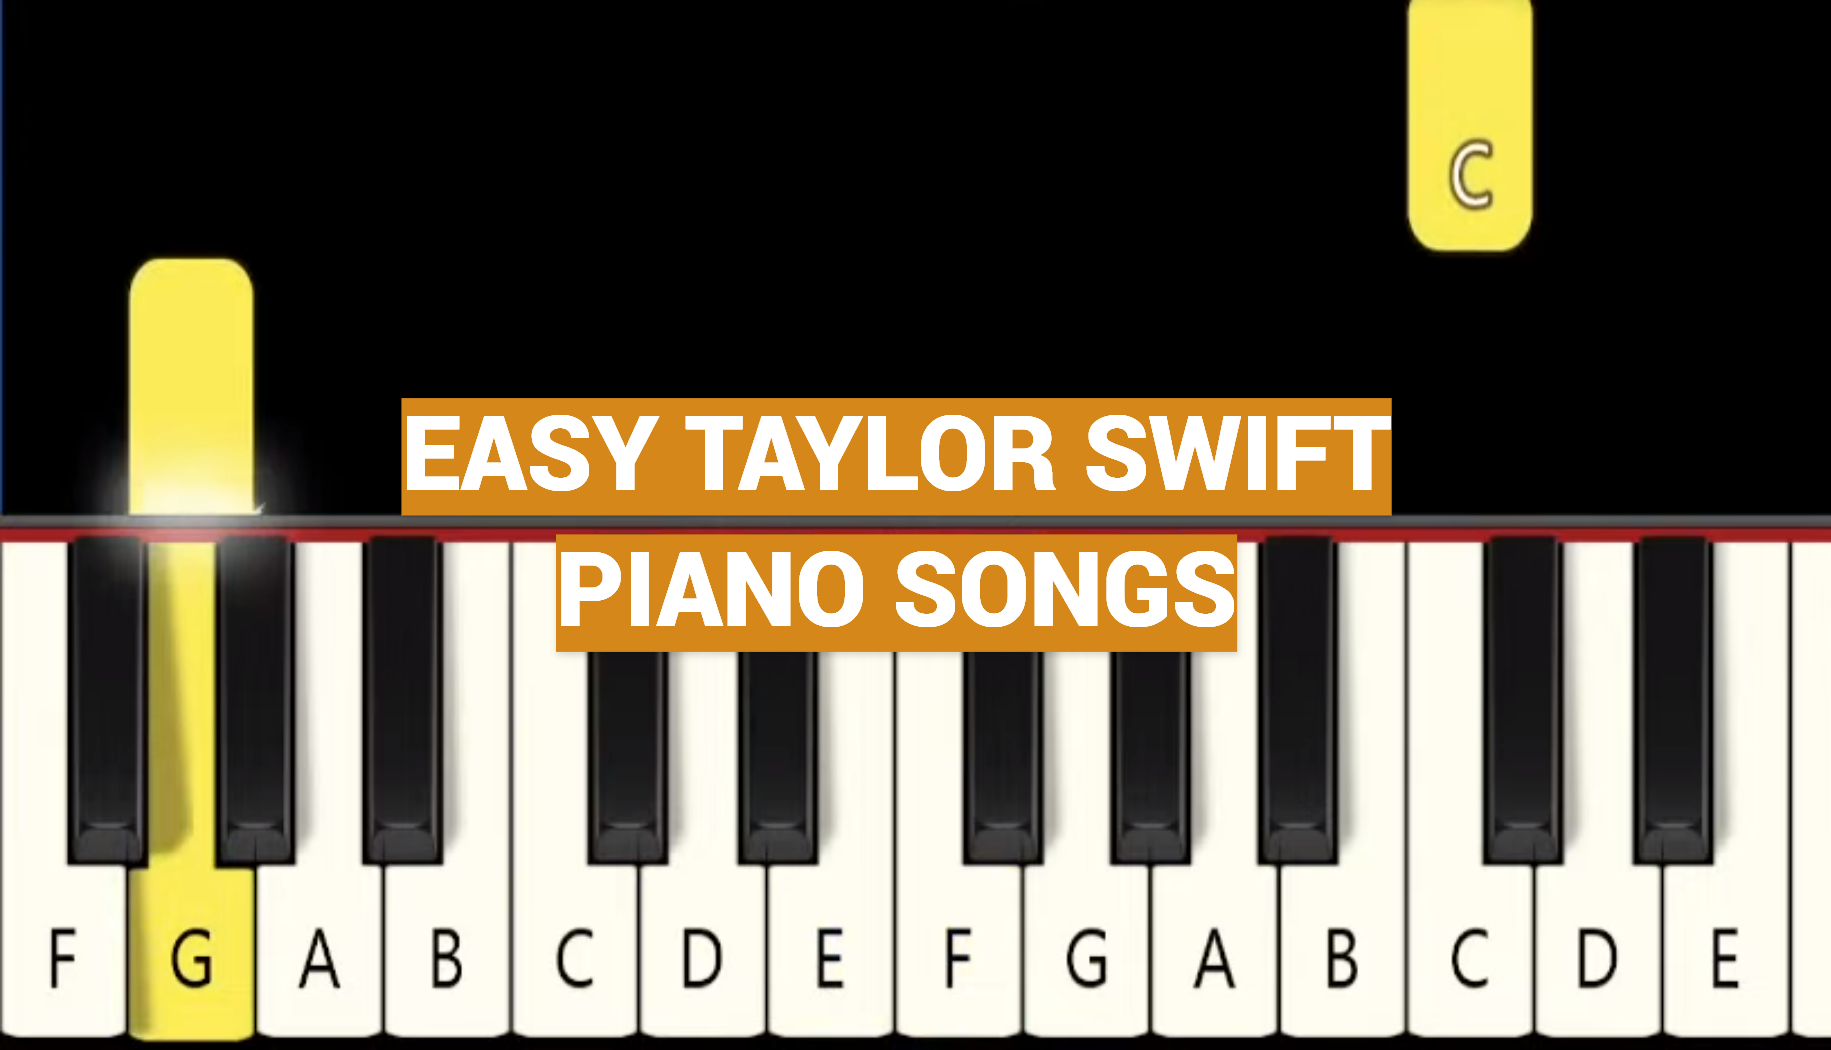 Easy Taylor Swift Piano Songs